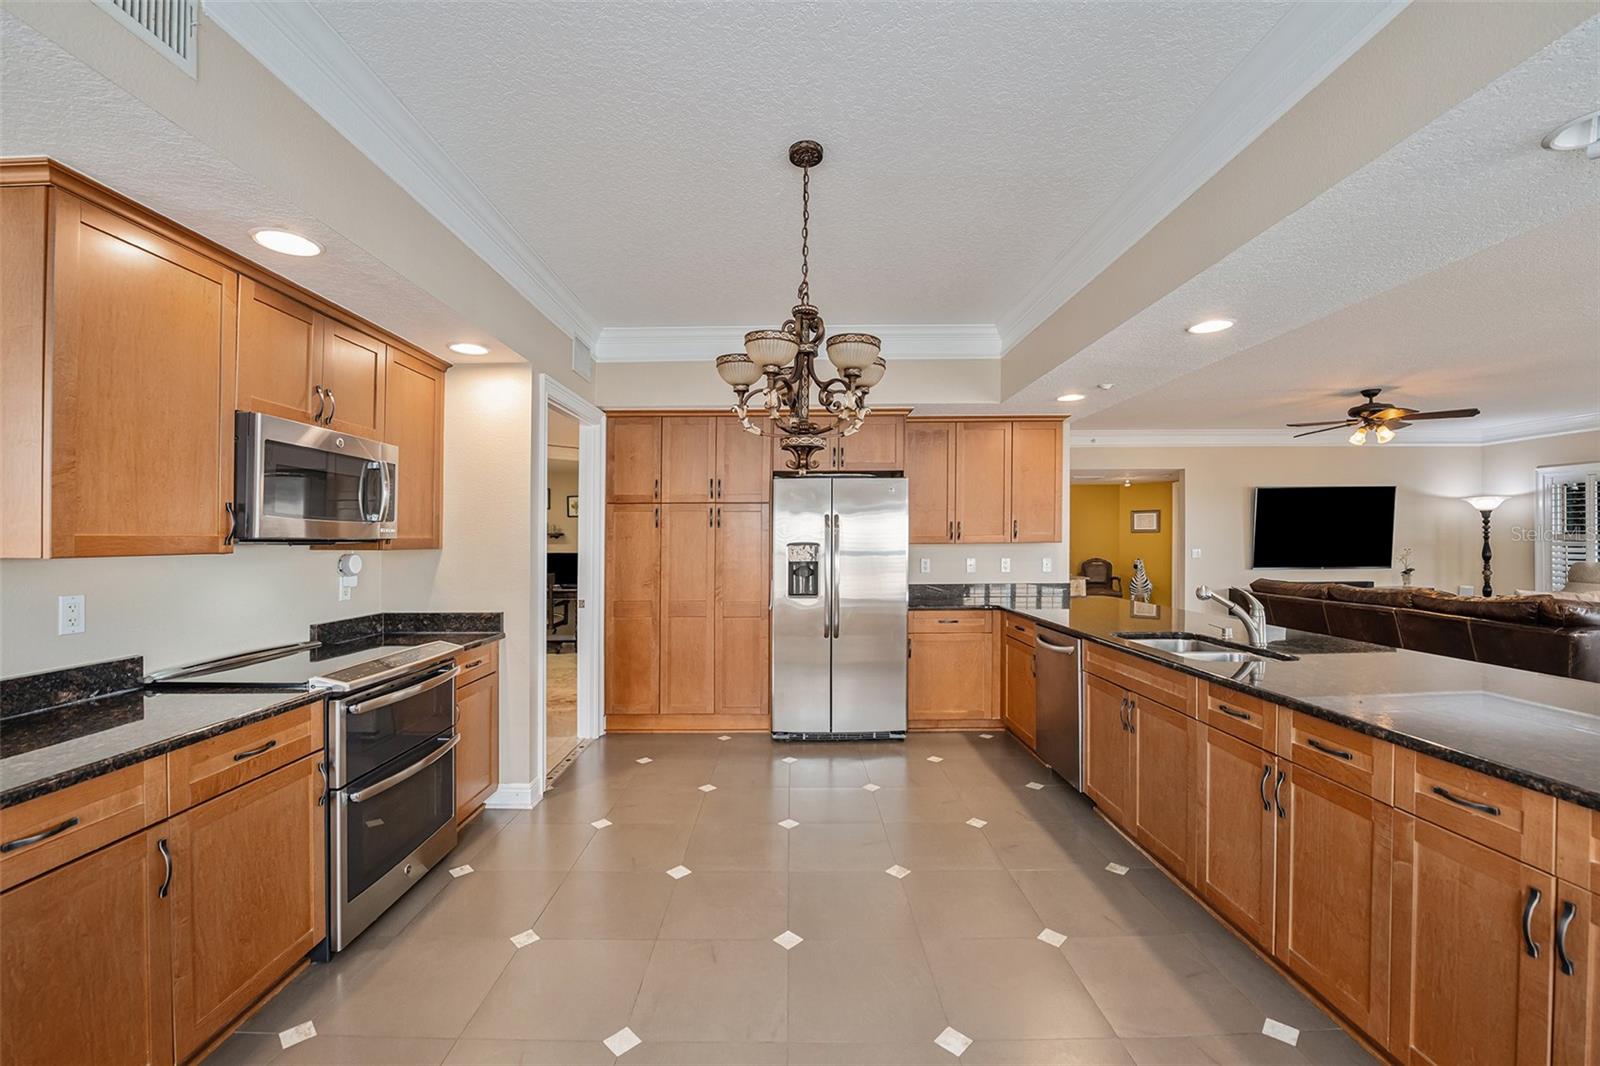 Tray Ceiling, Stainless Steel appliances, an abundance of cabinets and counter space all combine for the perfect Chef's kitchen!